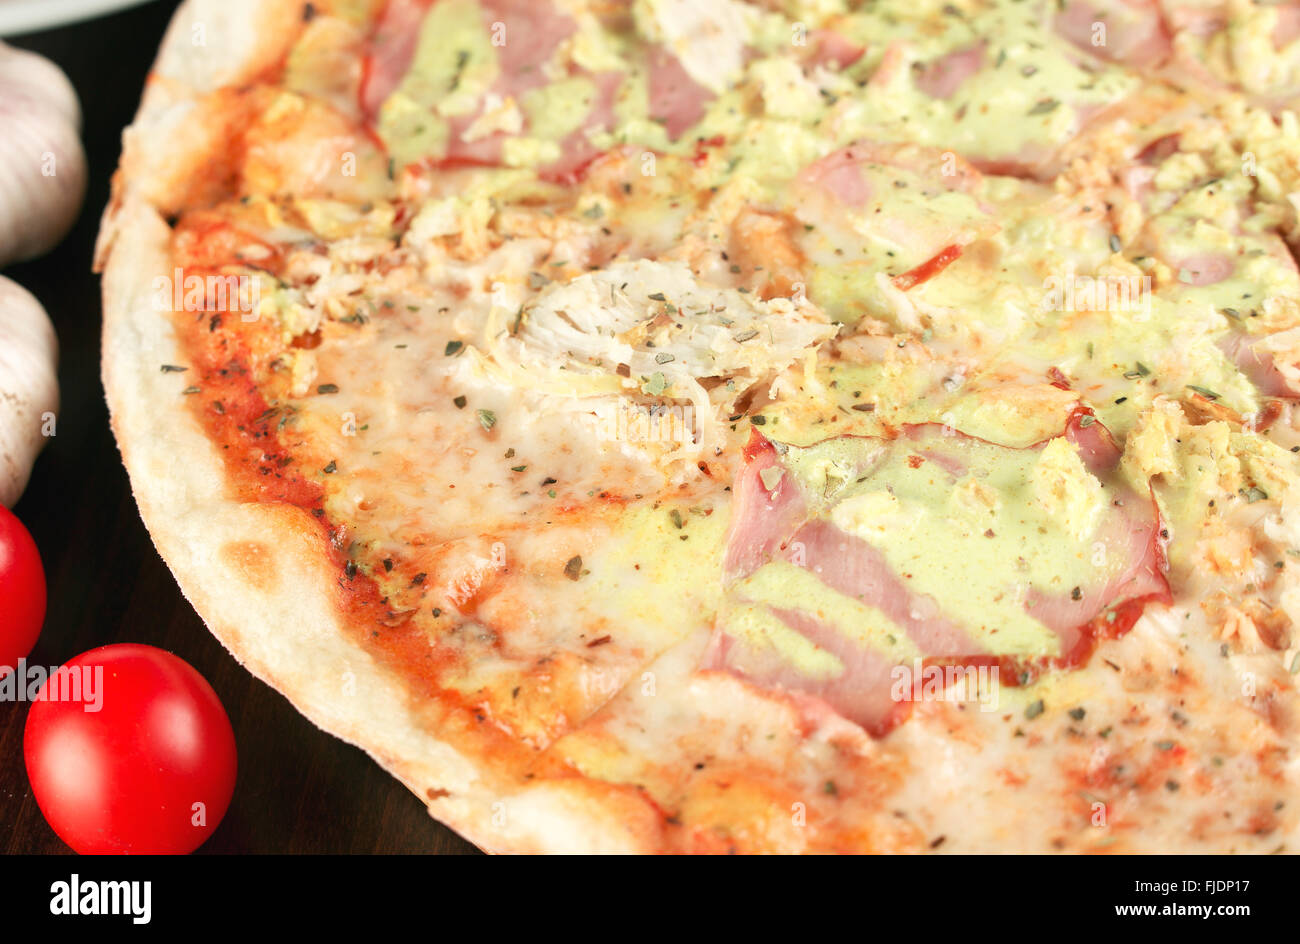 Tasty italian pizza with ham and chicken close up. Shallow depth of field Stock Photo